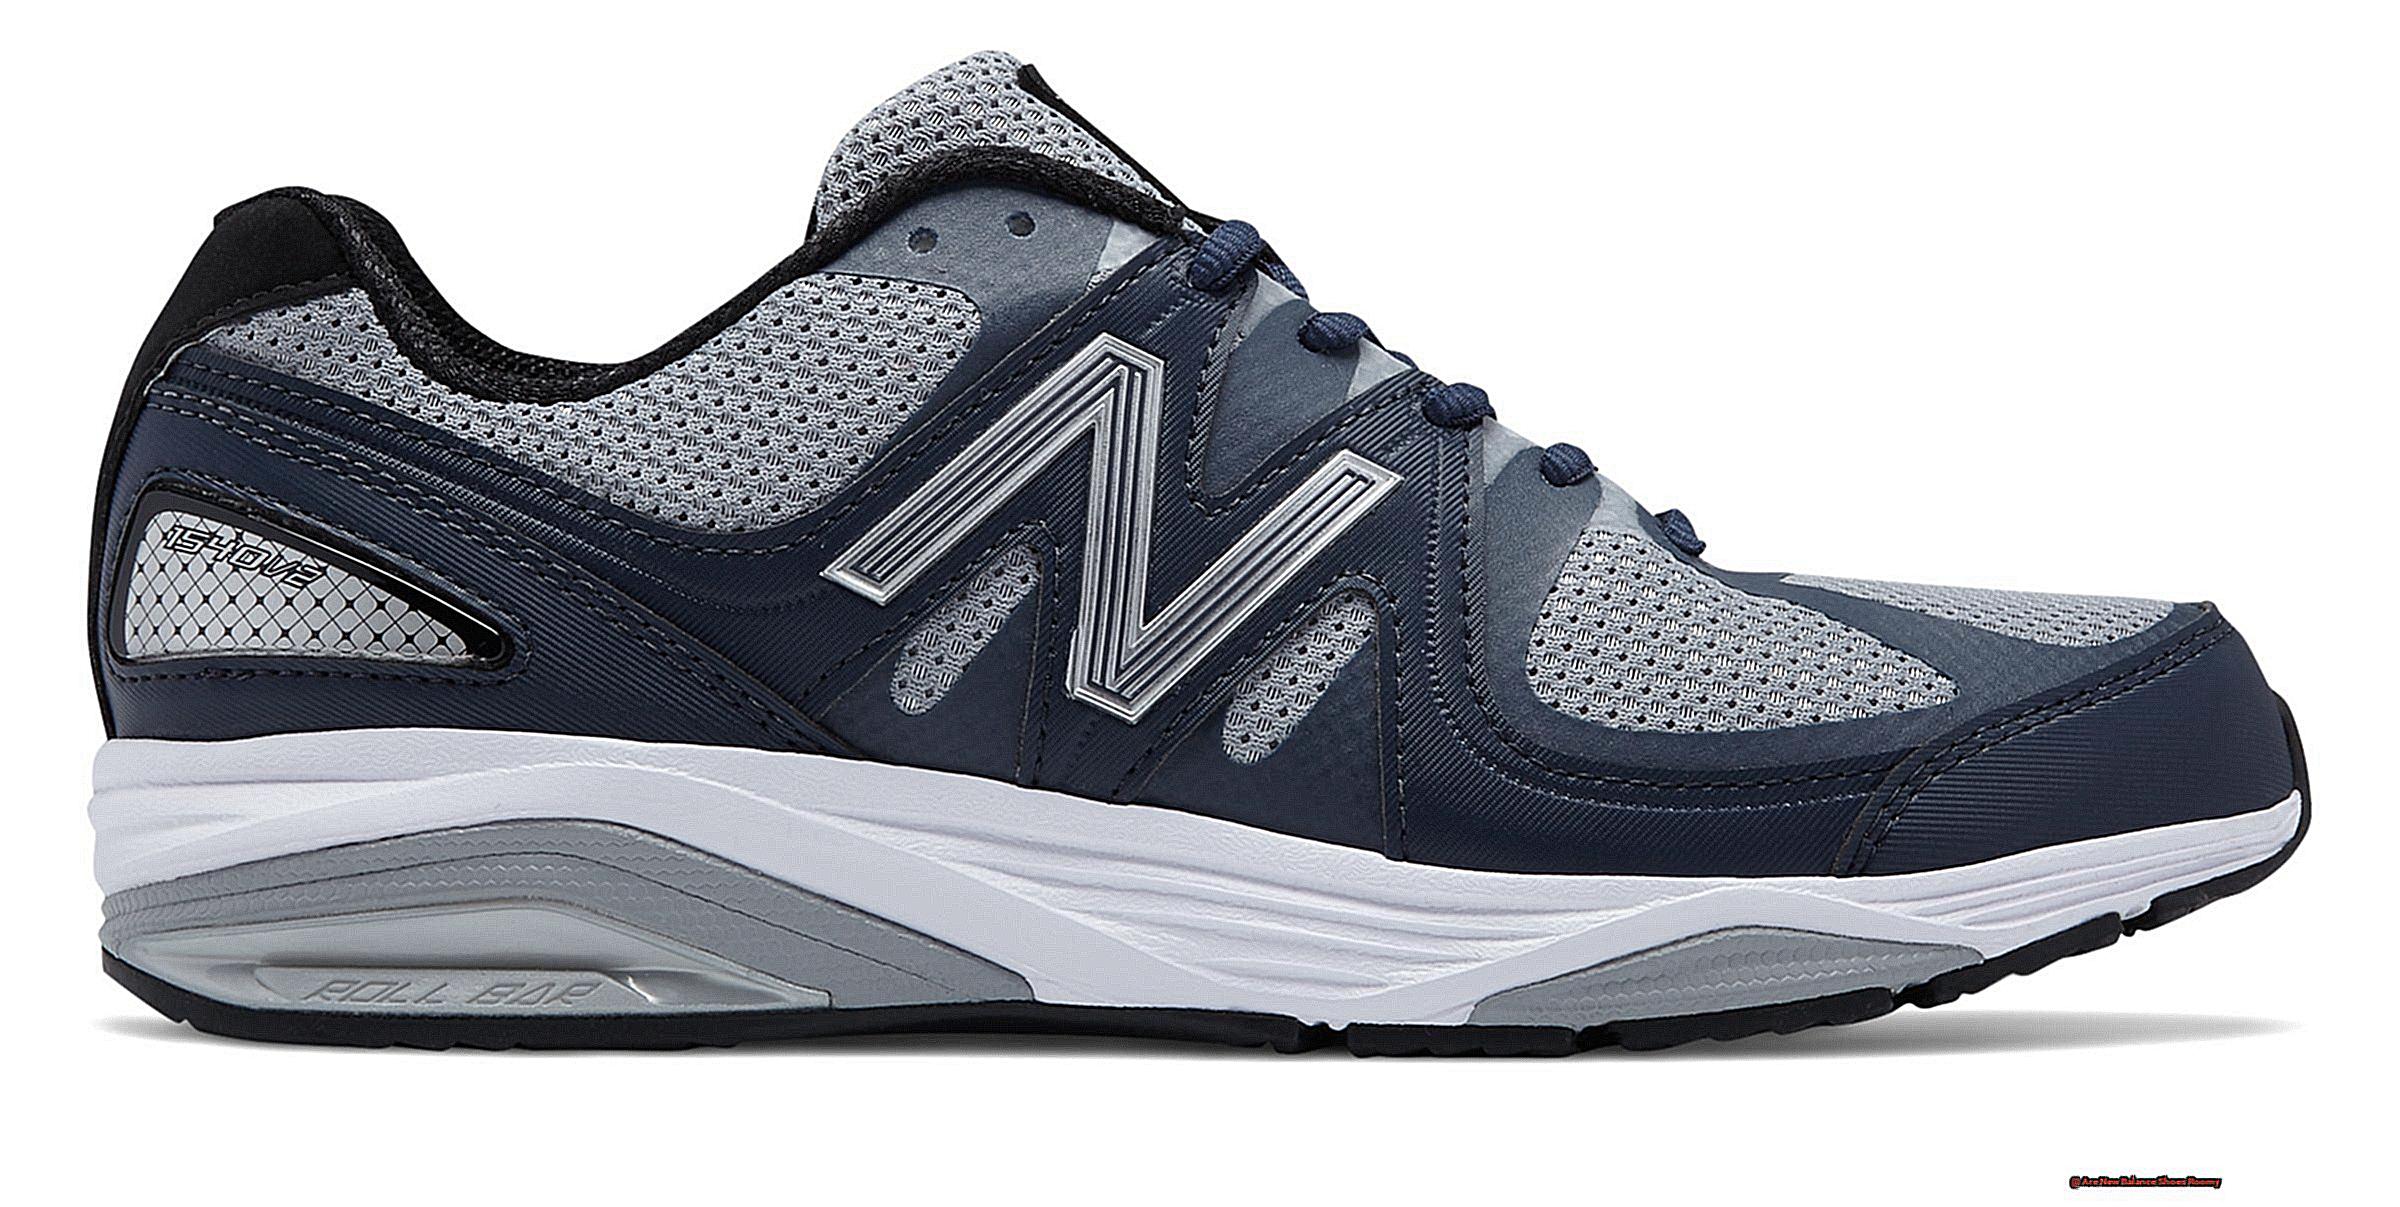 Are New Balance Shoes Roomy-2